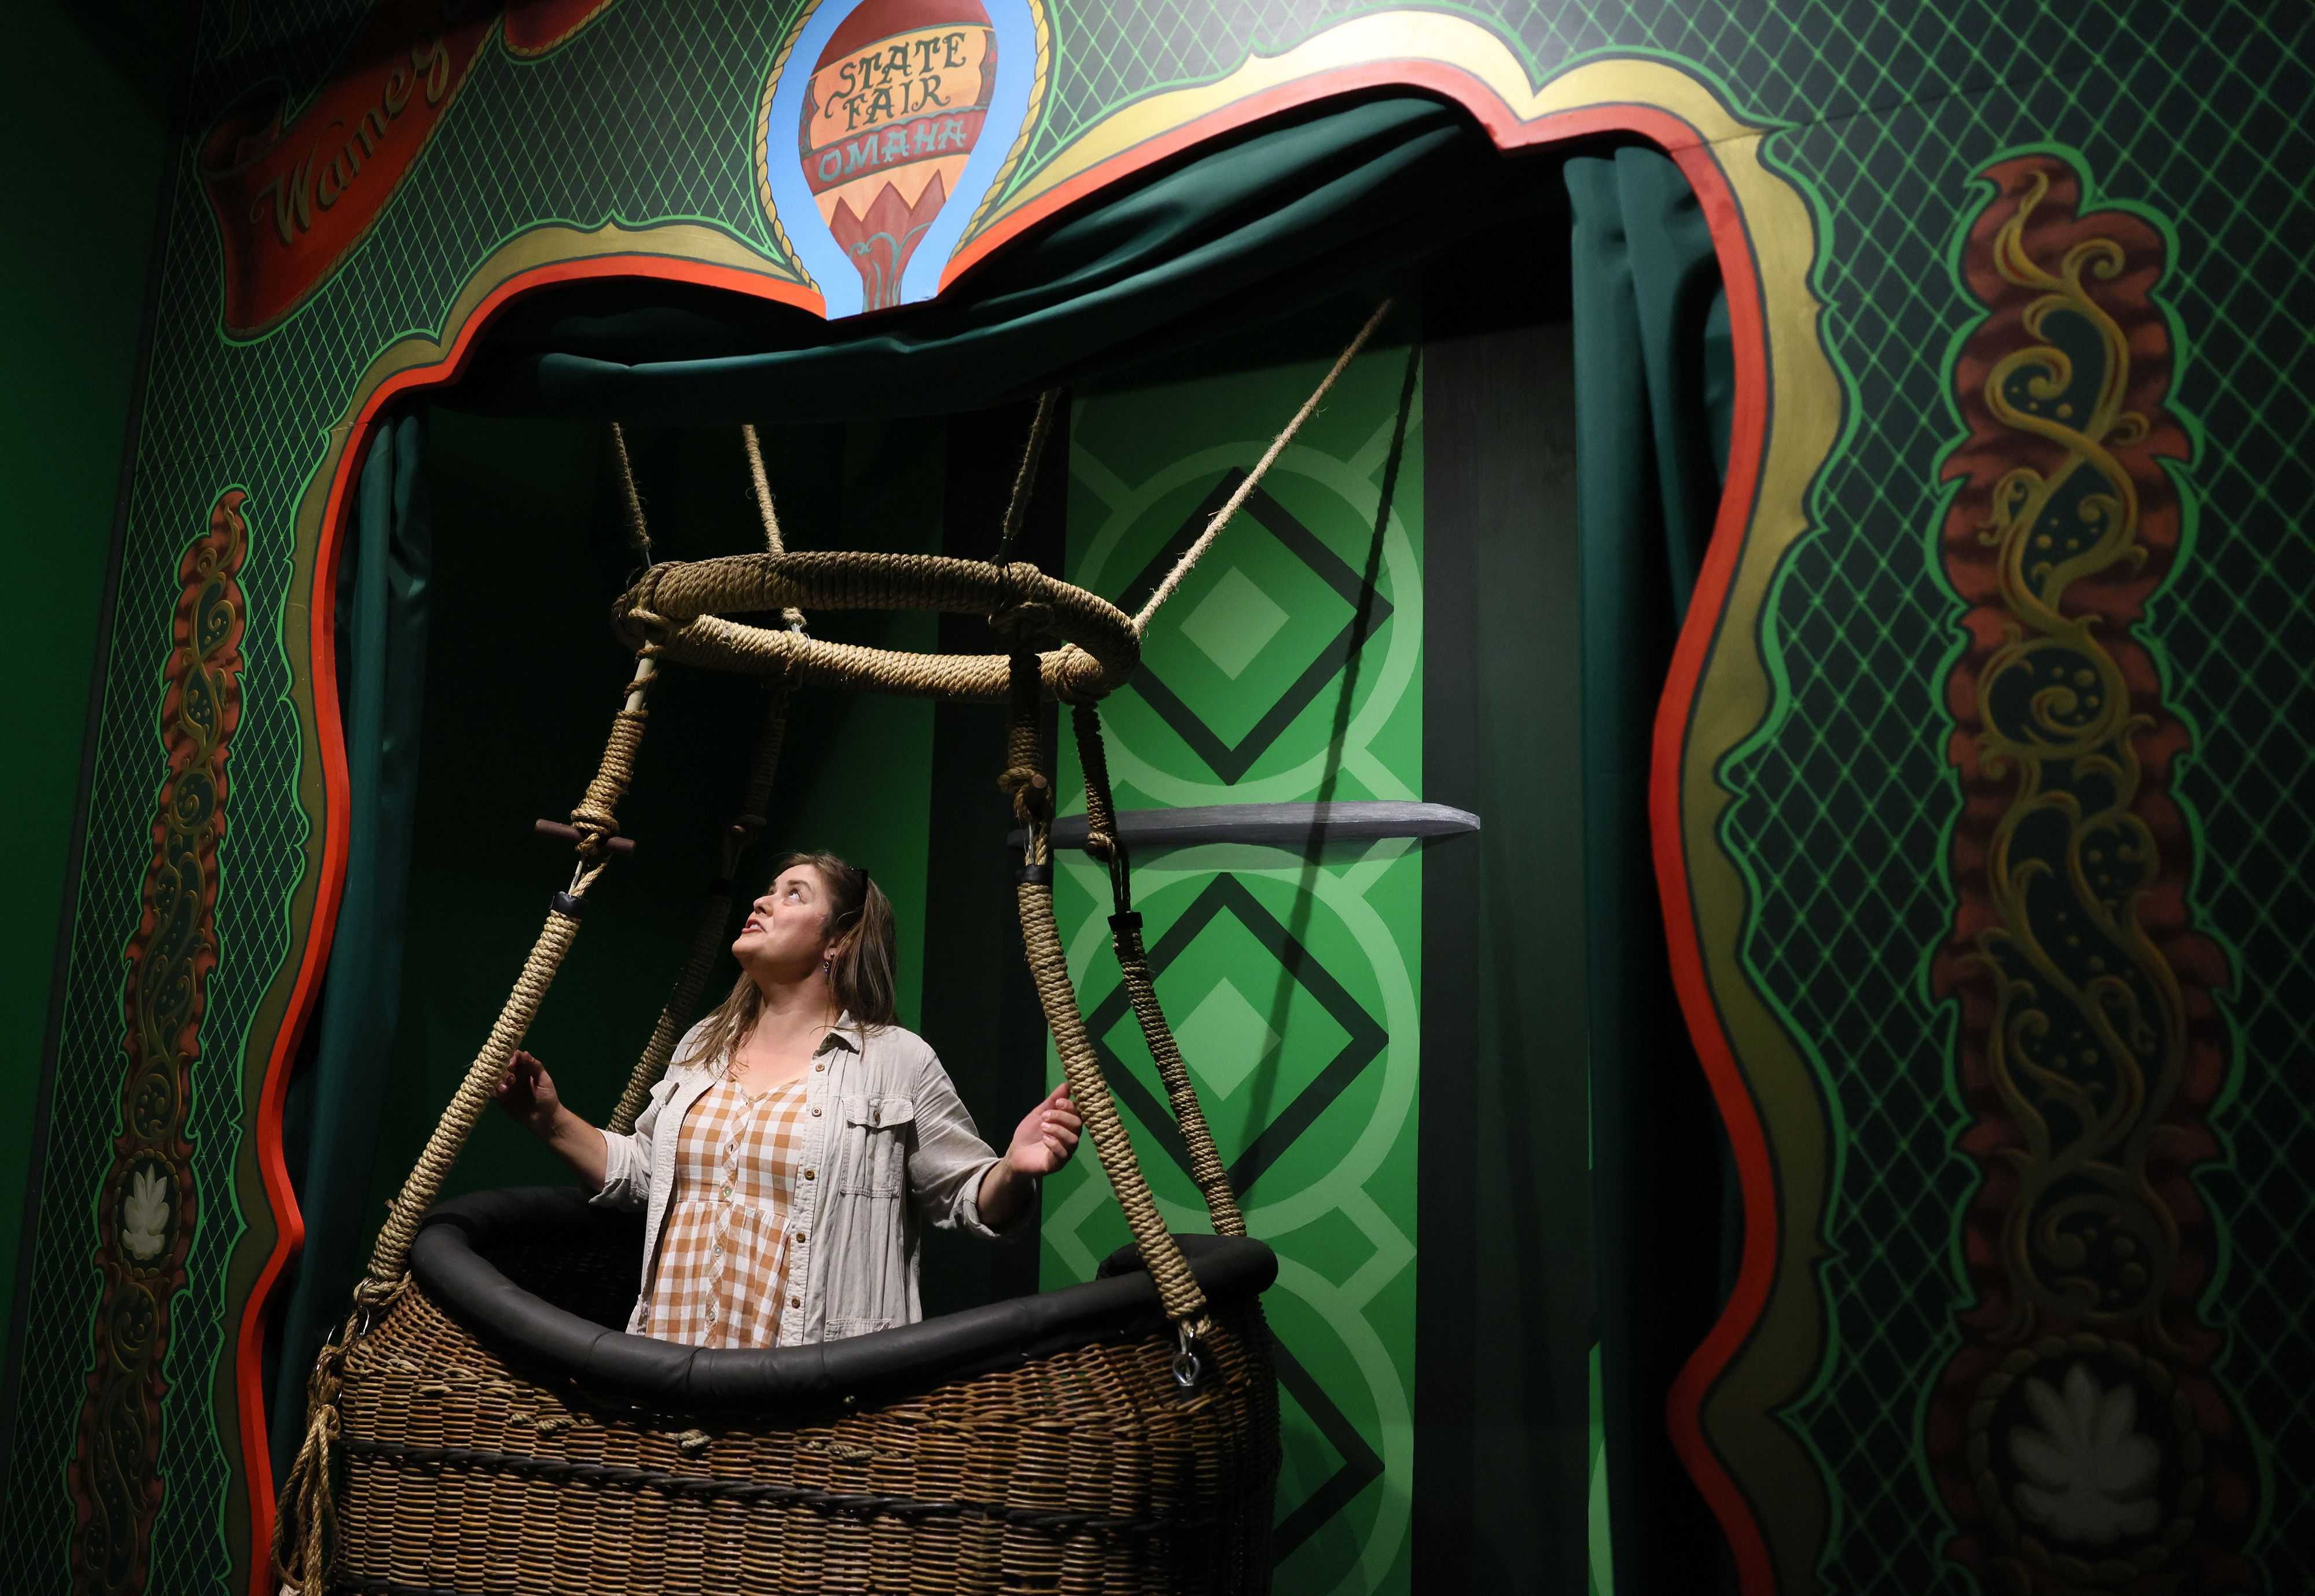 Laura Fredrickson looked up as she stepped into the basket of a hot air balloon to pose for a picture inside the OZ Museum.